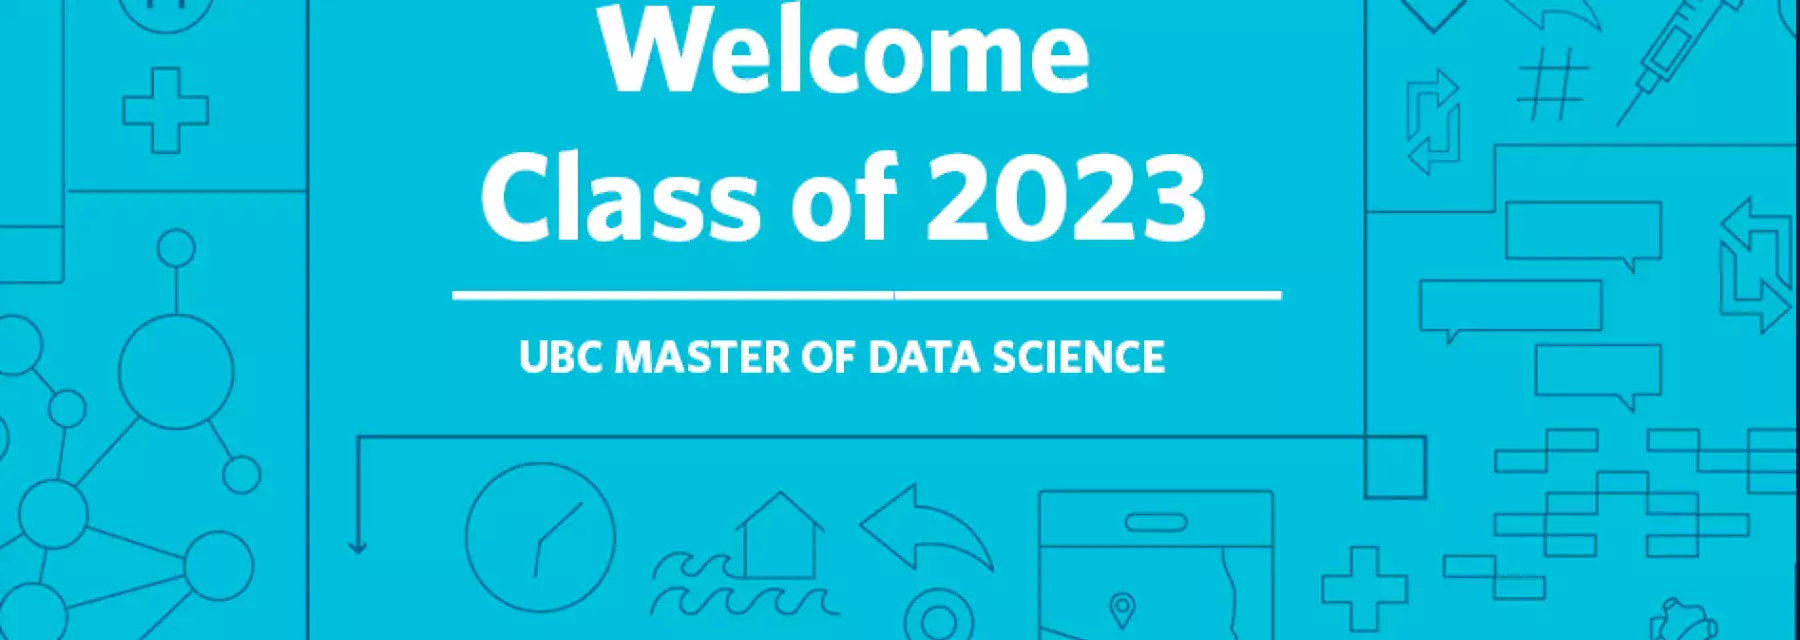 Master of Data Science Class of 2023